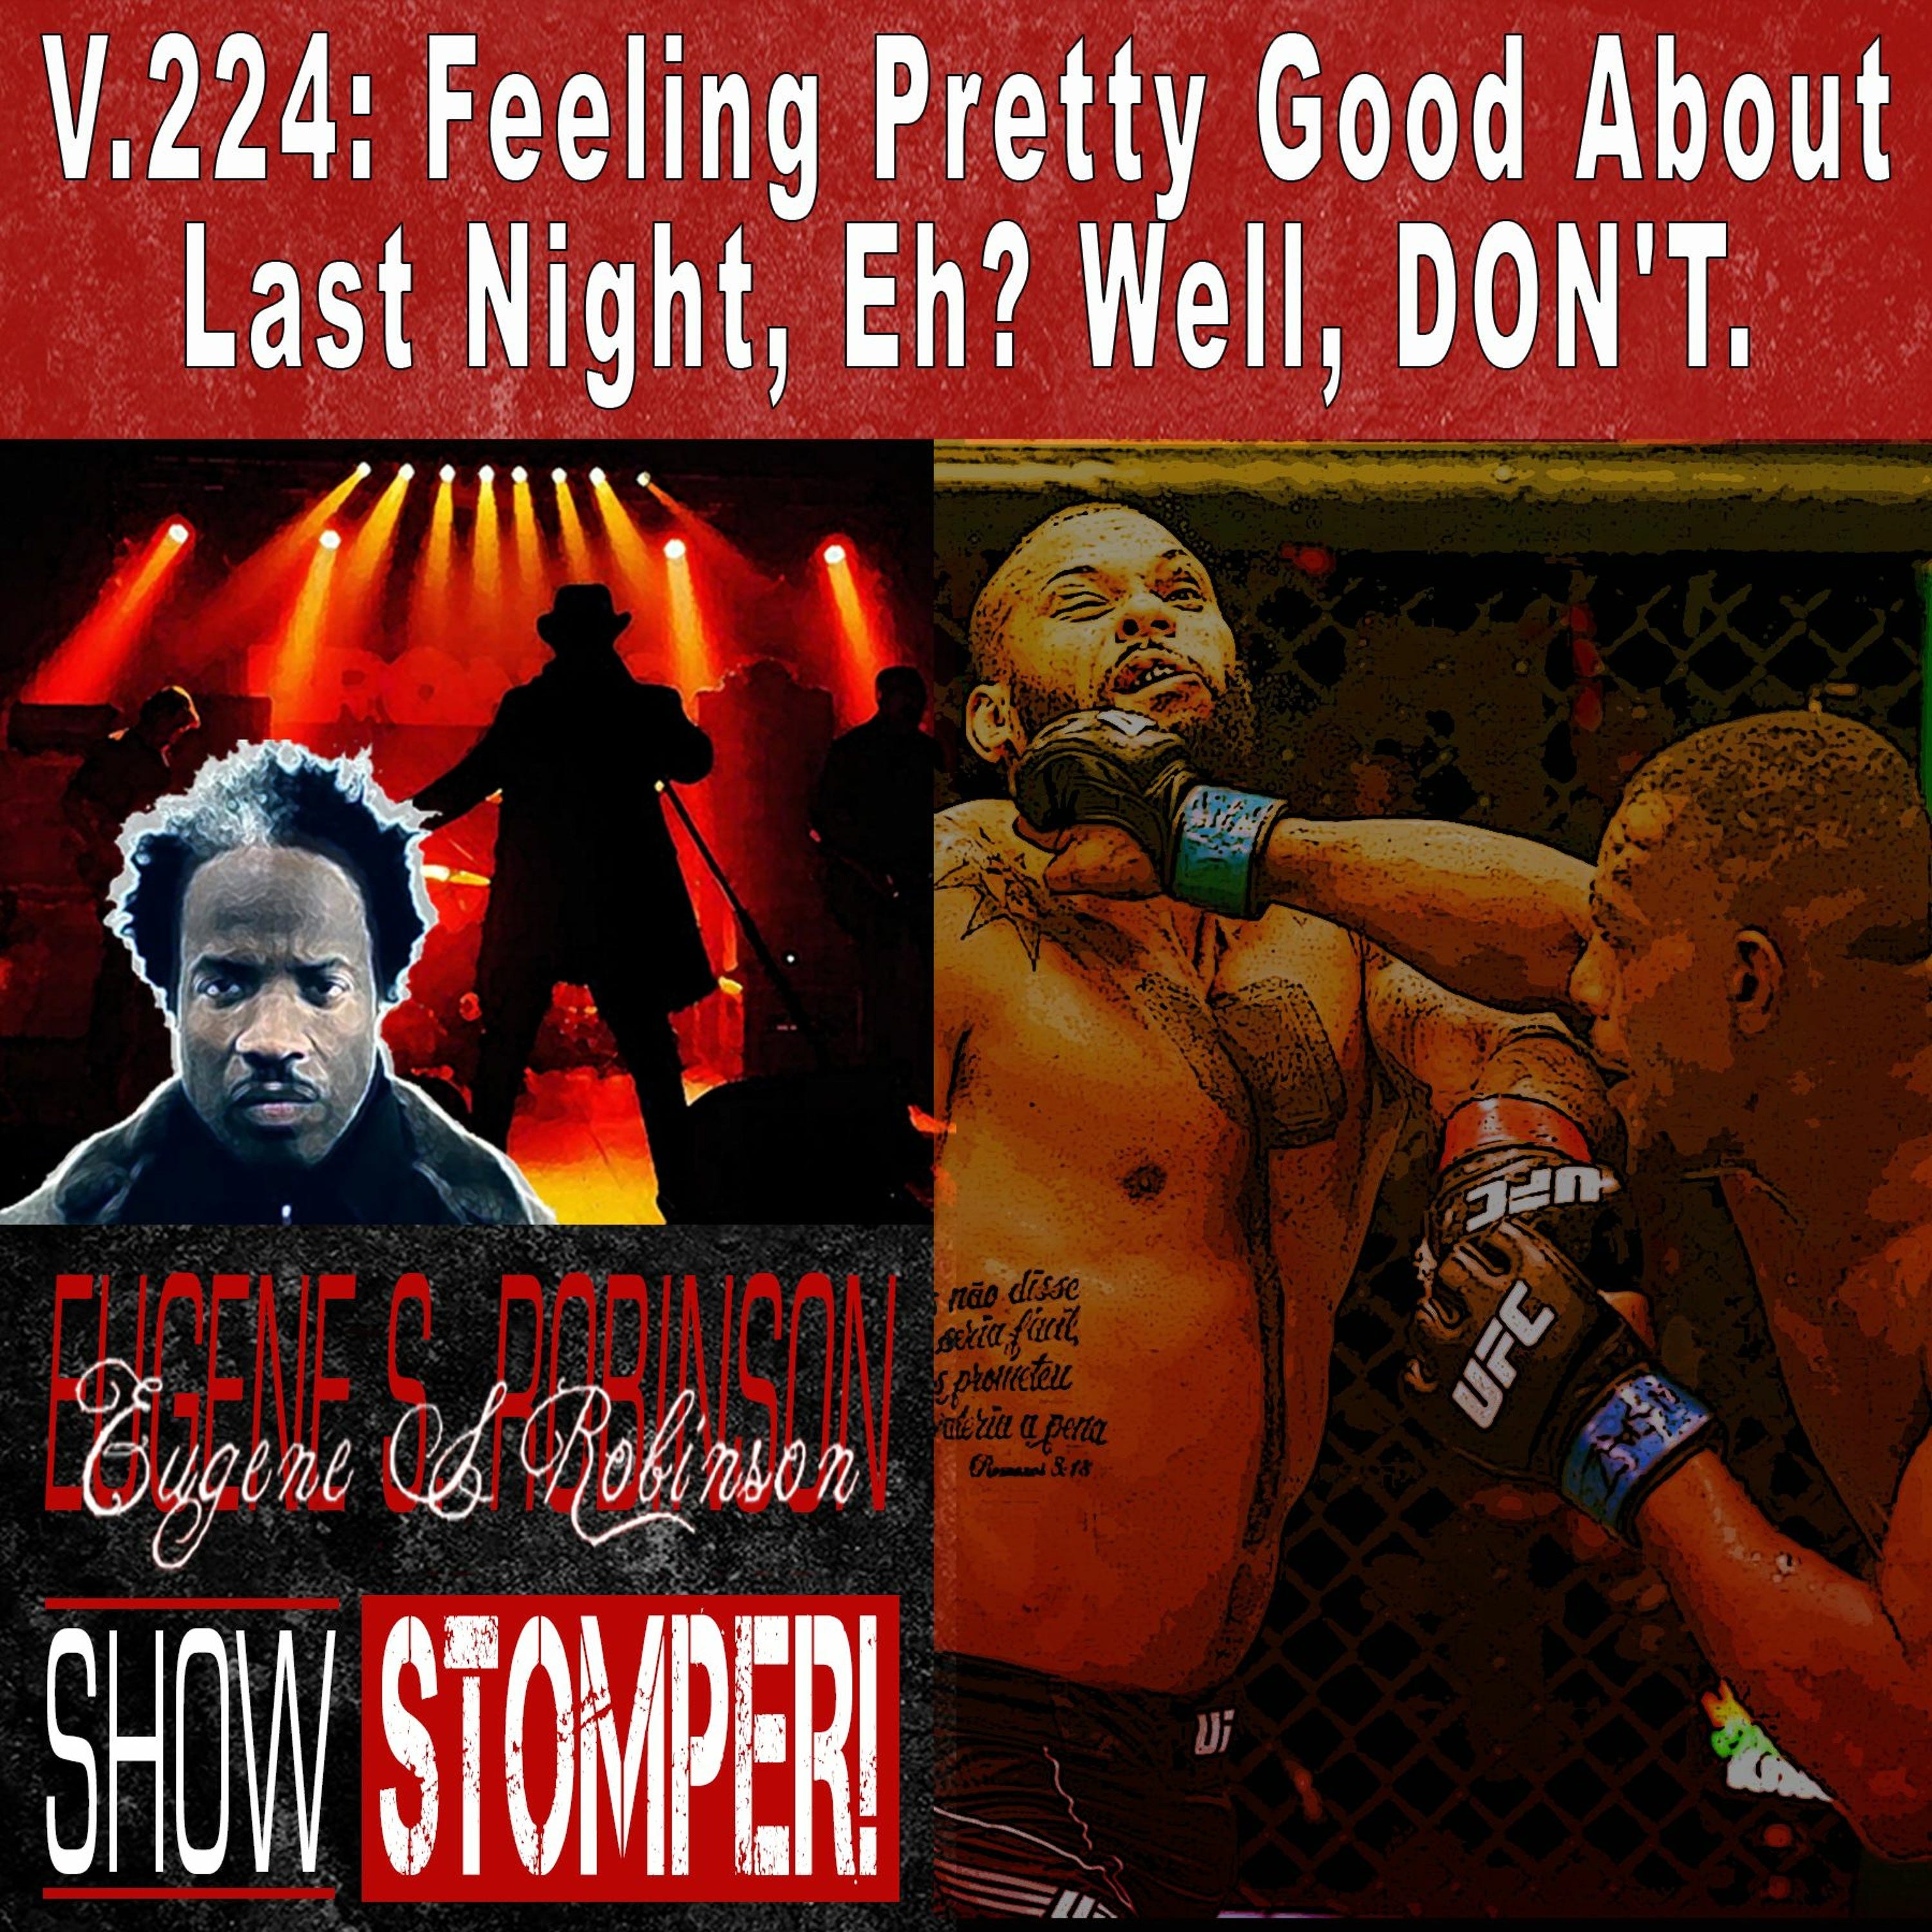 V.224: Feeling Pretty Good About Last Night, Eh? Well, DON'T. On The Eugene S. Robinson Show Stomper